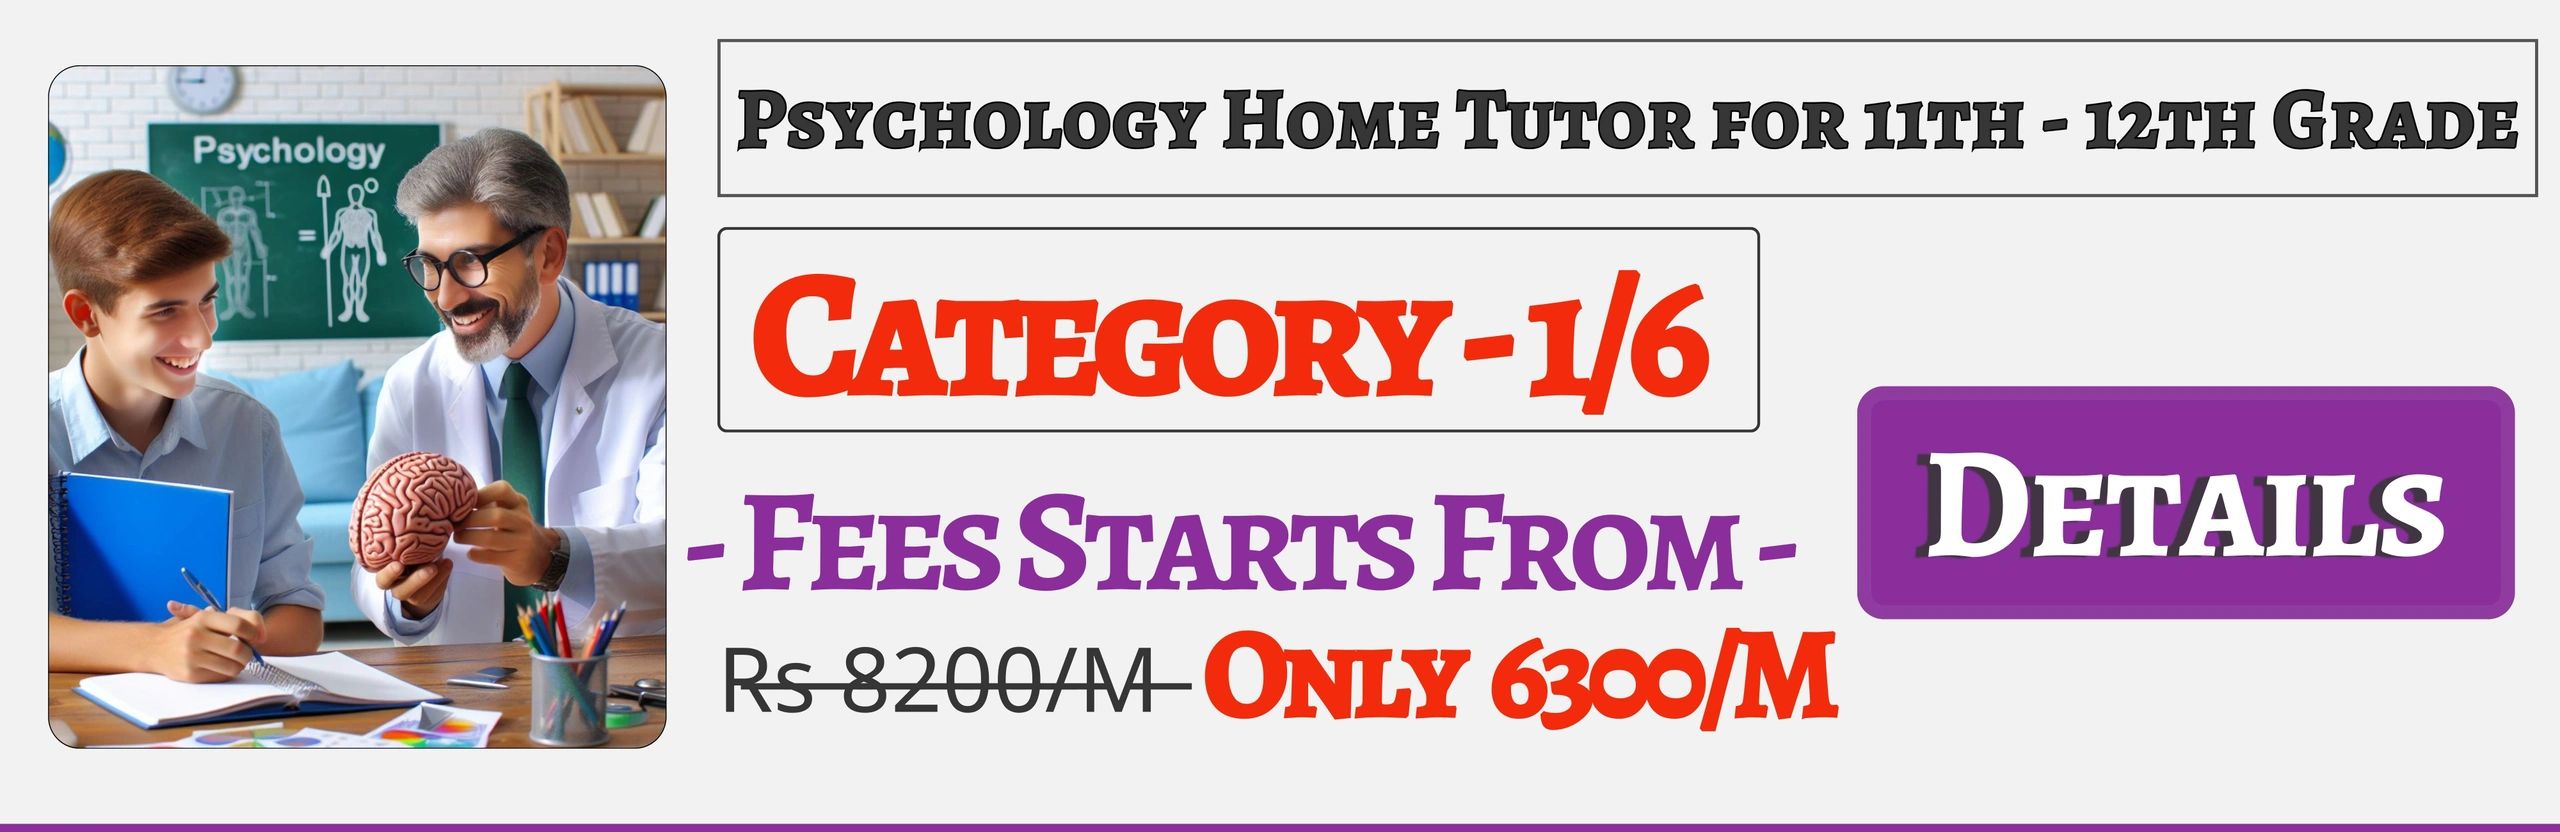 Book Best Nearby Psychology Home Tuition Tutors For 11th & 12th In Jaipur , Fees Only 6300/M